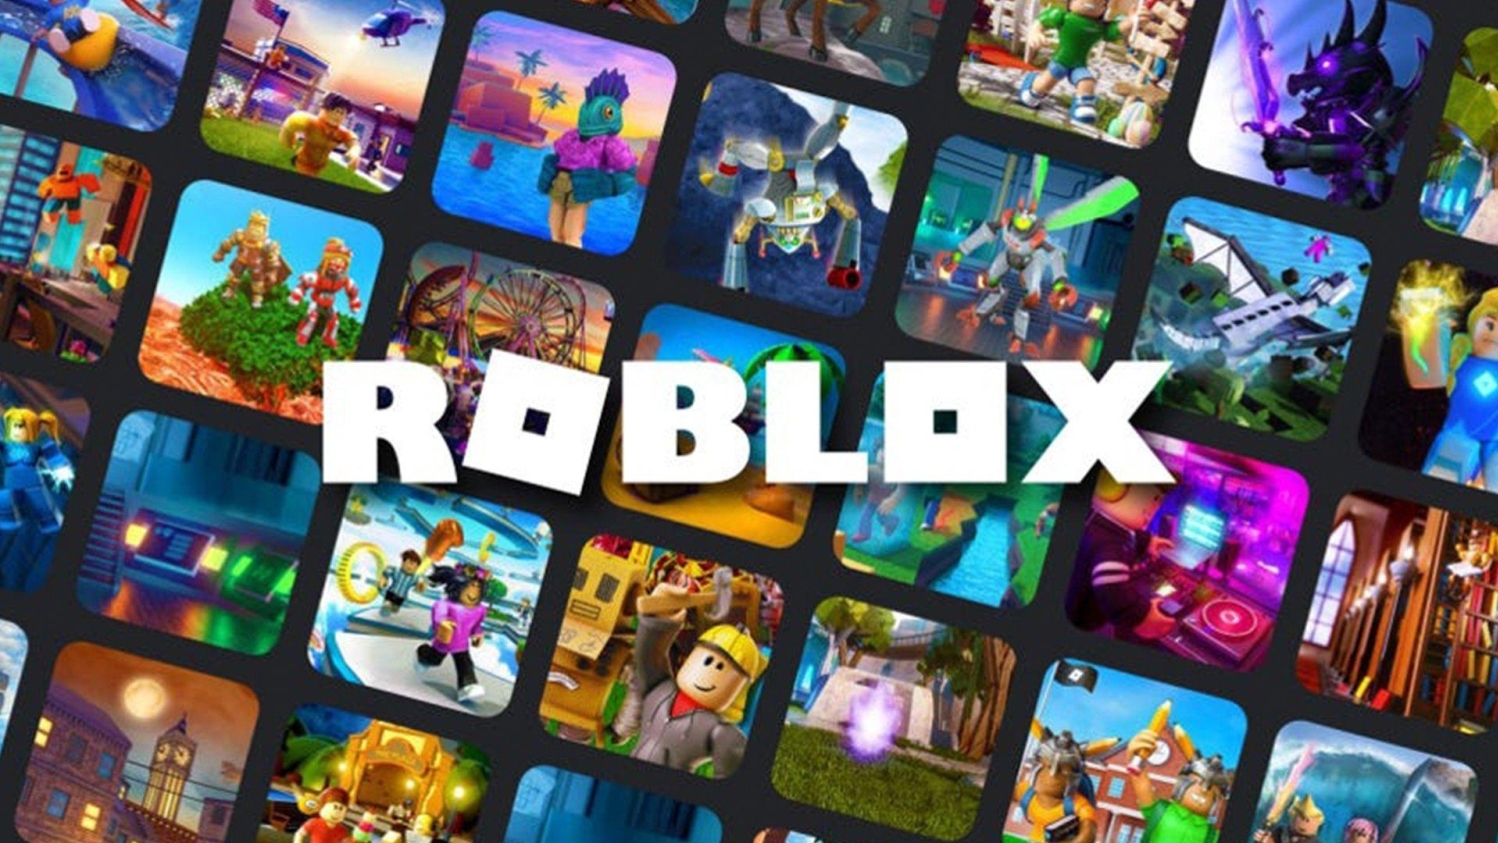 Roblox is finally coming to the PS5 and PS4 in October